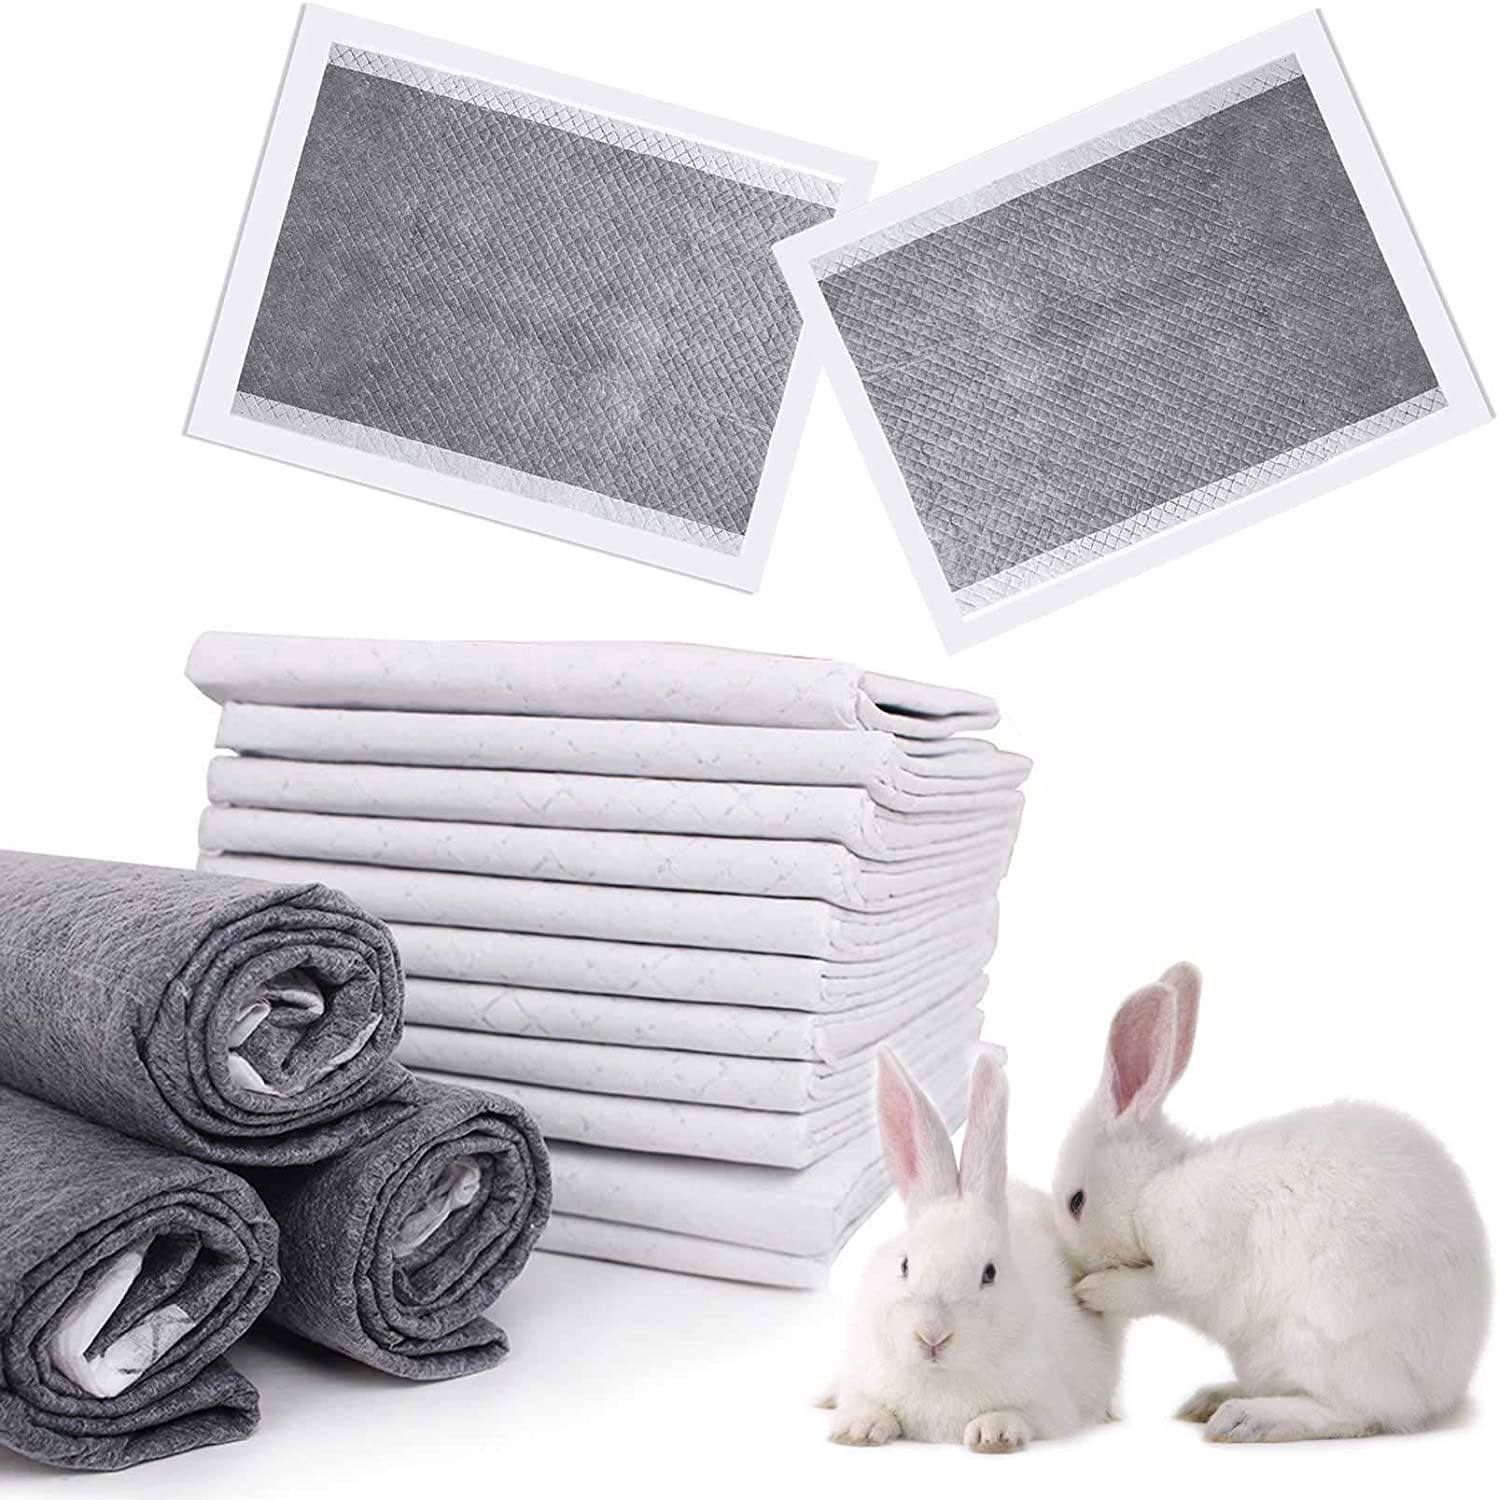 Kathson Rabbit Pee Pads Disposable Cage Liners 50PCS All-Absorb Black Carbon Odor-Control Bunny Training Accessories with Quick-Dry Surface for Puppy Guinea Pig Kitten Hedgehog Small Animals